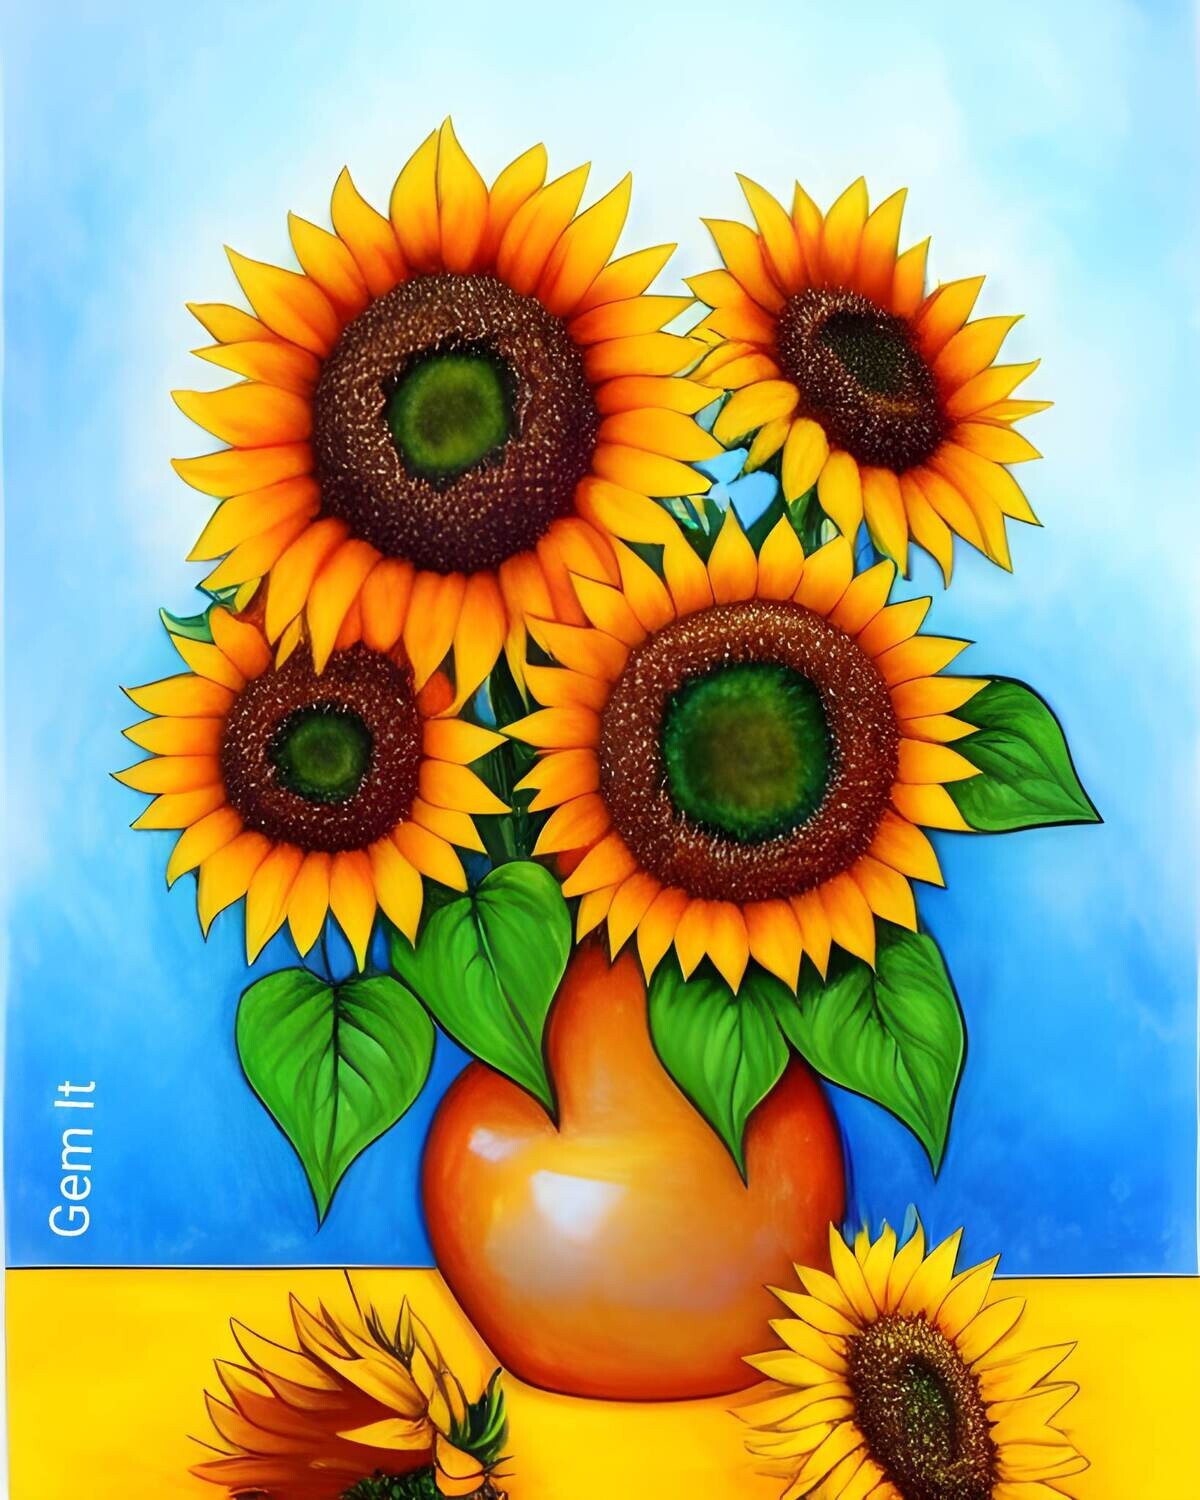 Vase of Sunflowers - Specially ordered for you. Delivery is approximately 4 - 6 weeks.